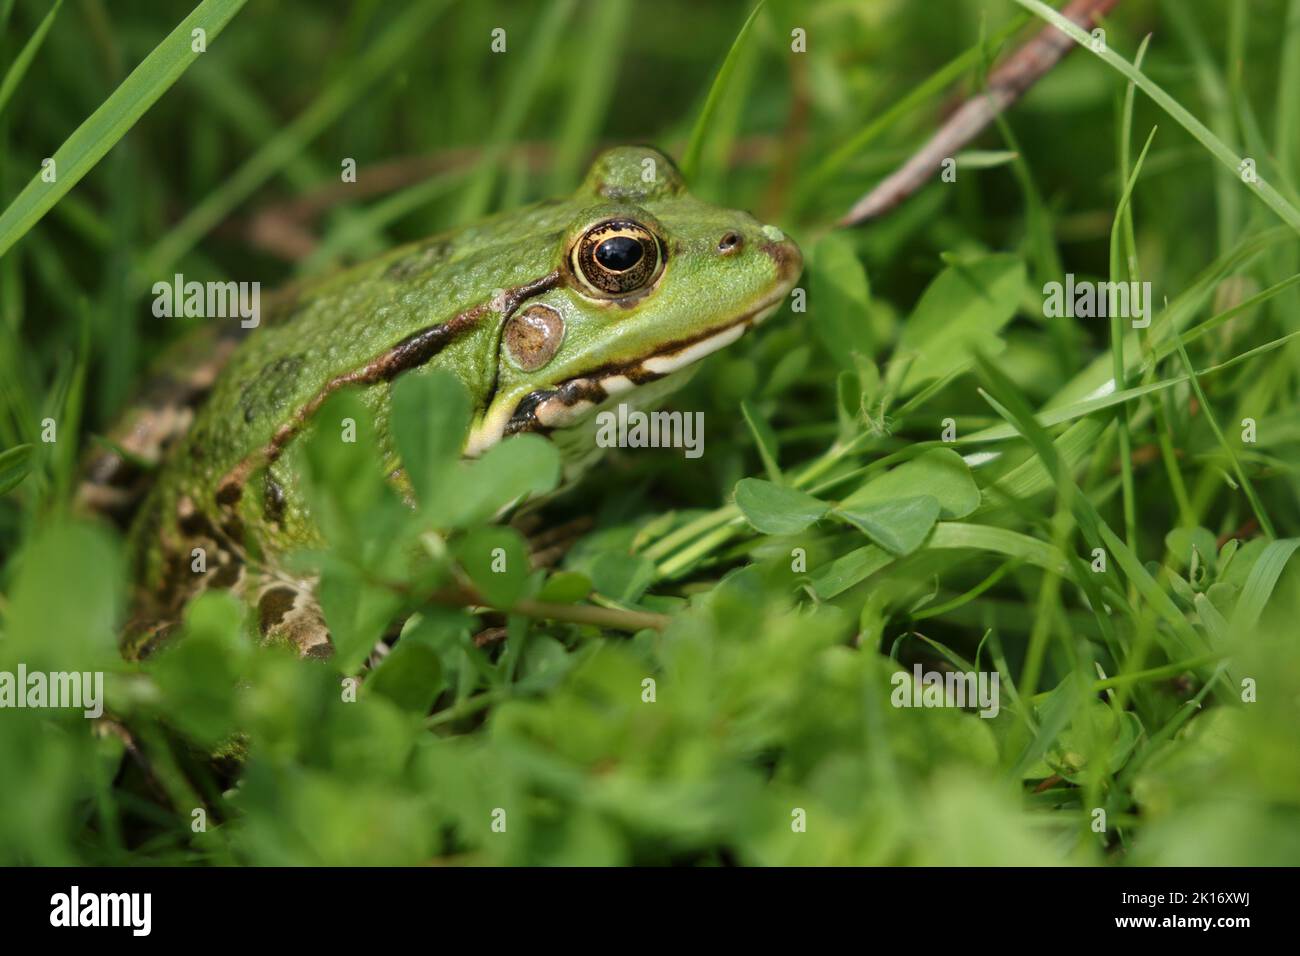 A Marsh Frog sitting in the vegetation at the edge of a pond in the UK. Stock Photo